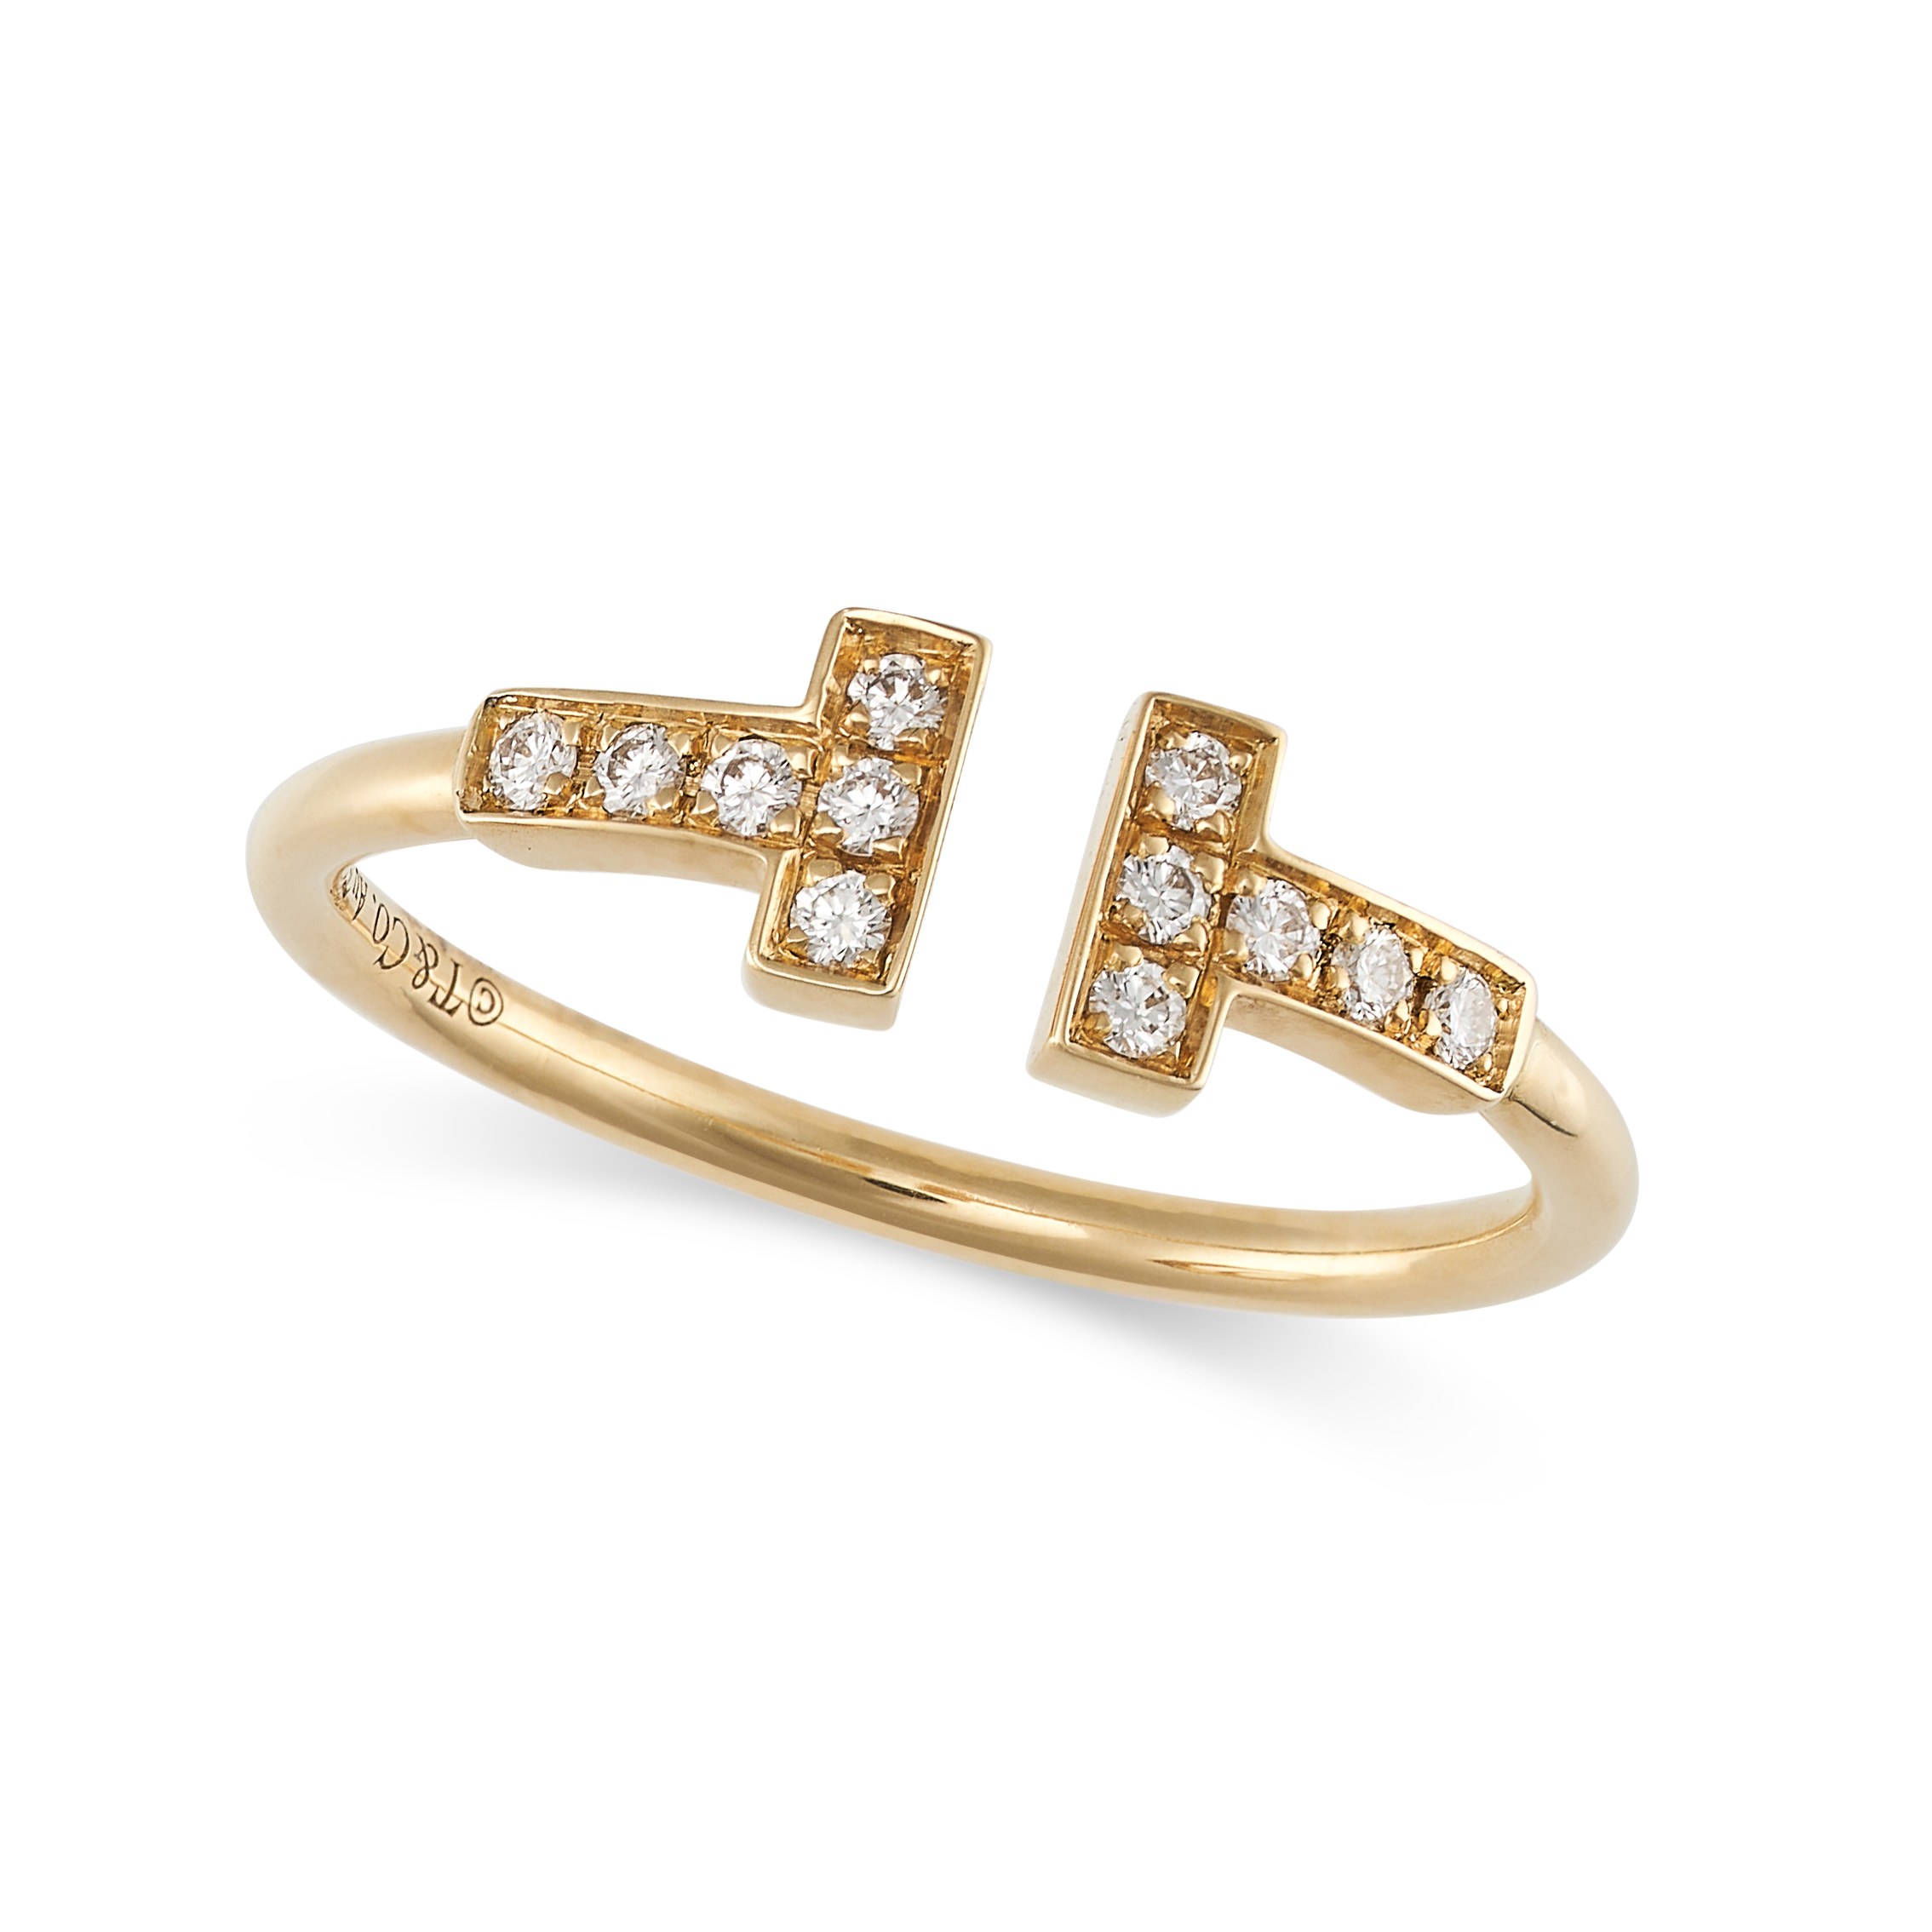 TIFFANY & CO., A DIAMOND T WIRE RING in 18ct yellow gold, designed as two T motifs set with round... - Image 2 of 2